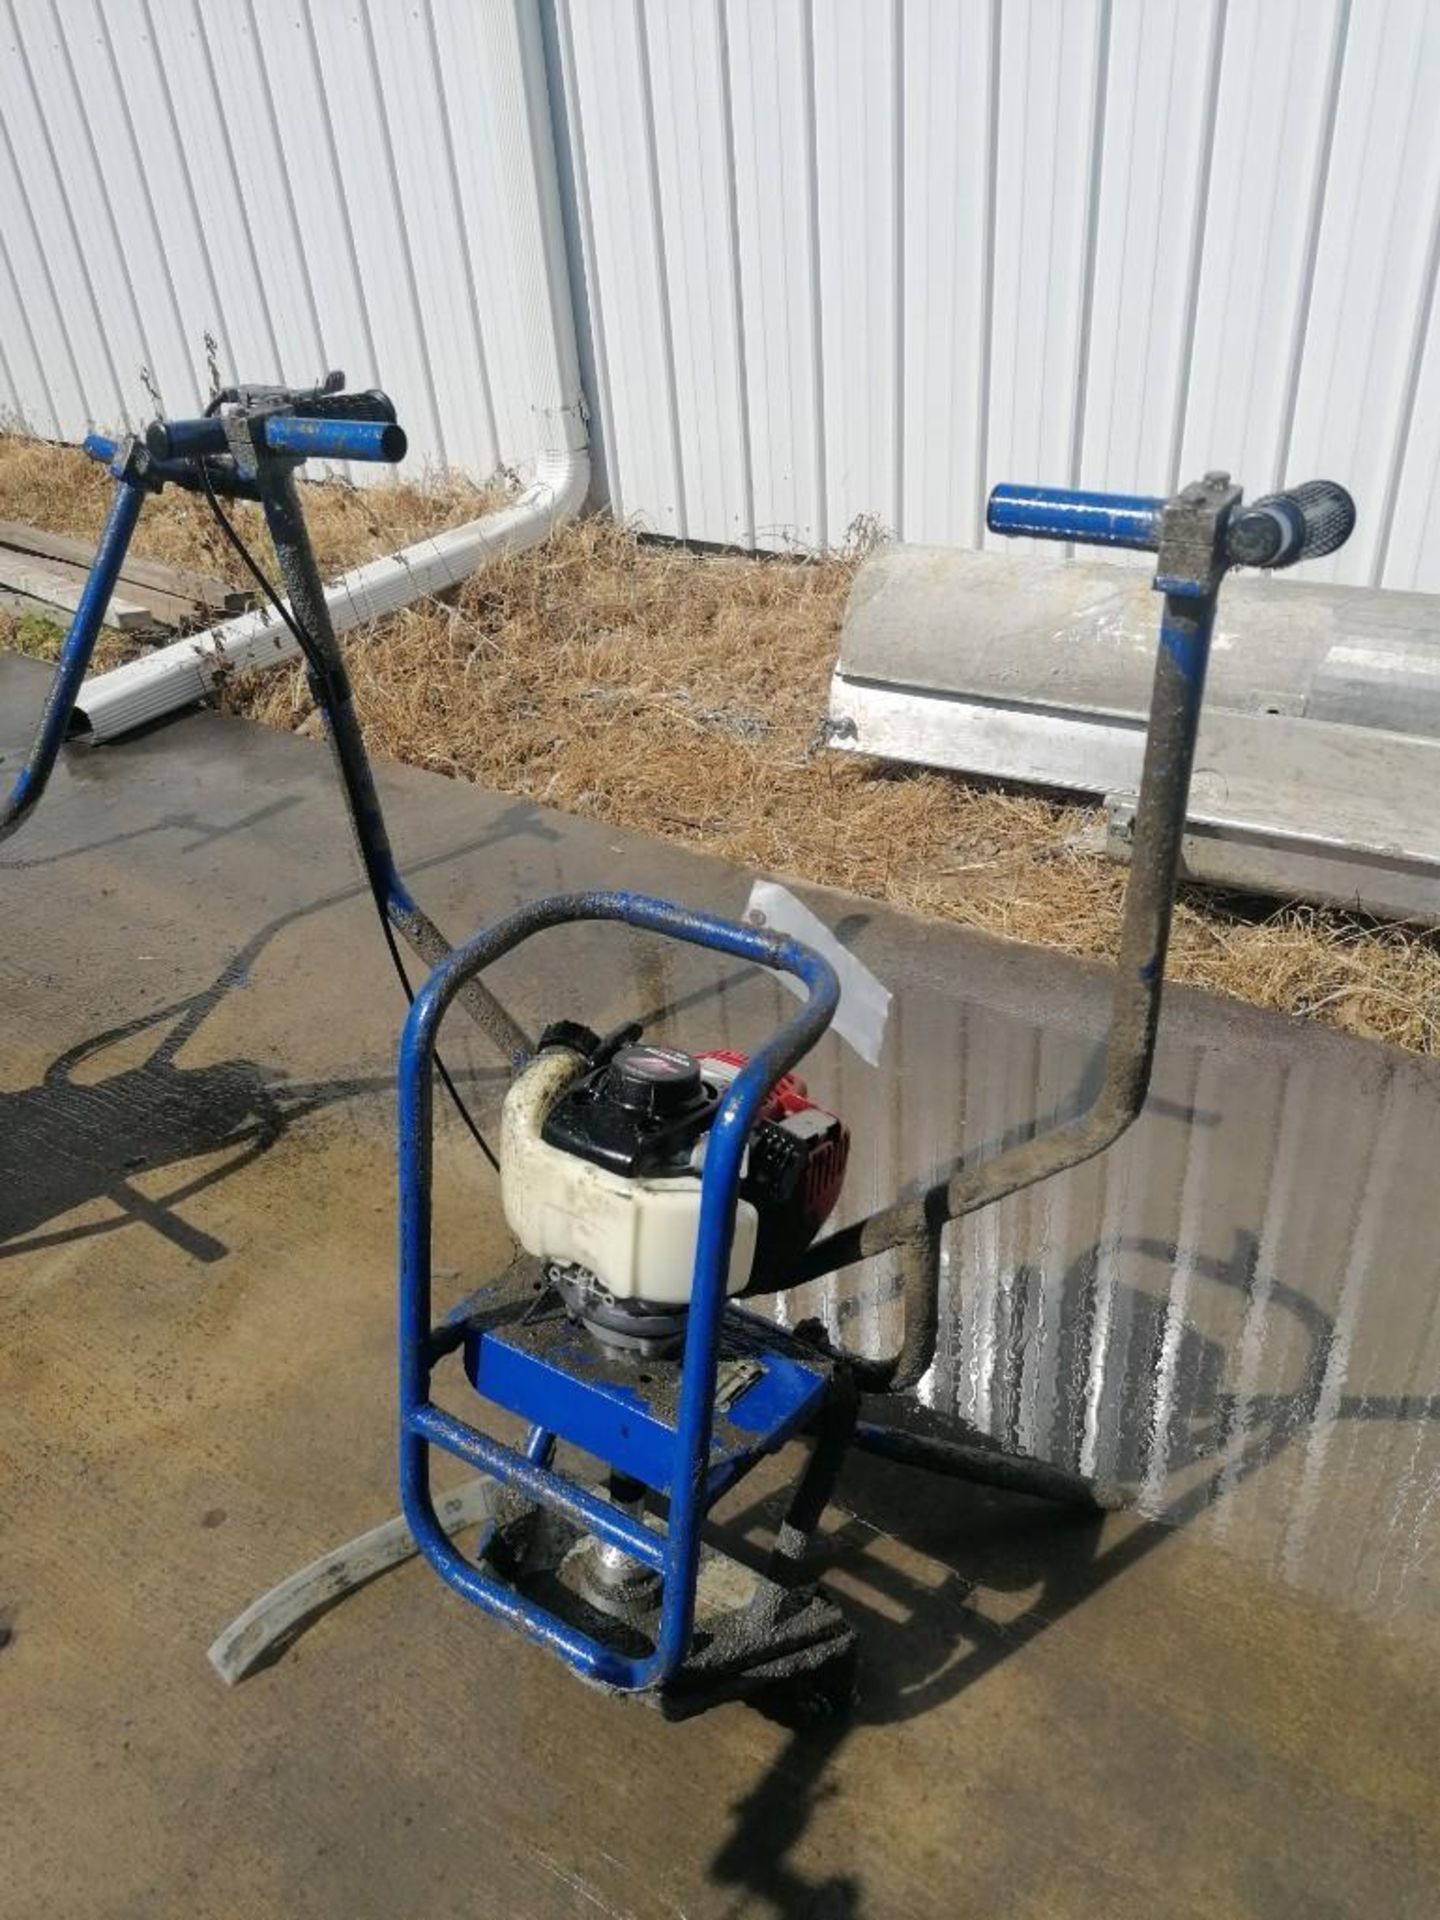 Shockwave Power Screed with Honda GX35 Motor, Serial #5838, 33.8 Hours. Located at 301 E Henry